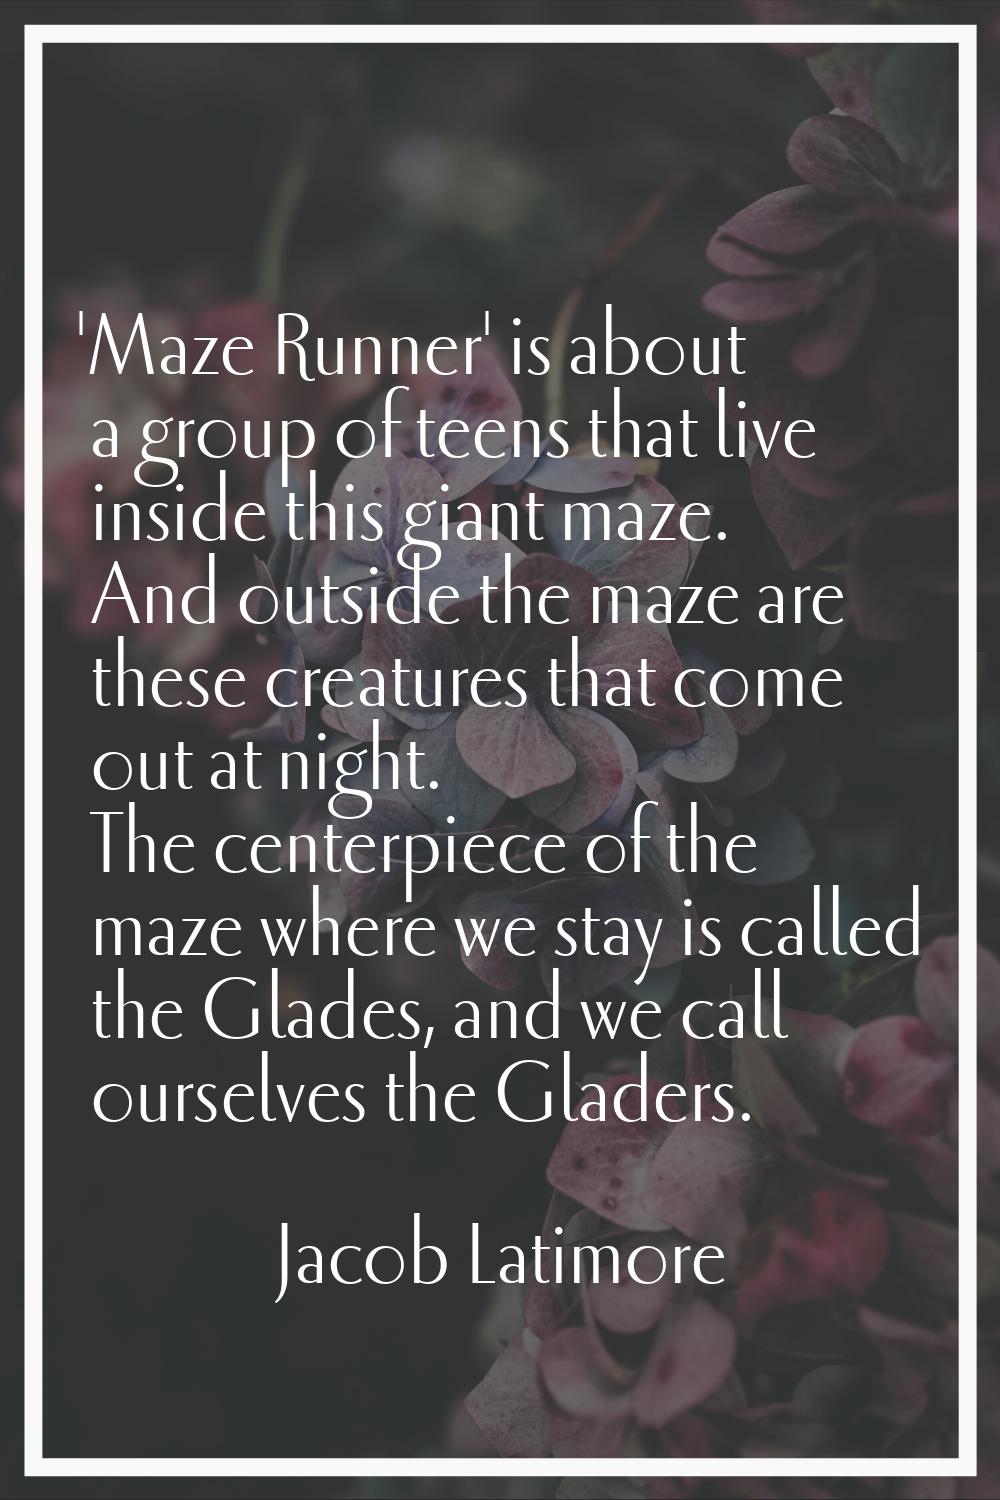 'Maze Runner' is about a group of teens that live inside this giant maze. And outside the maze are 